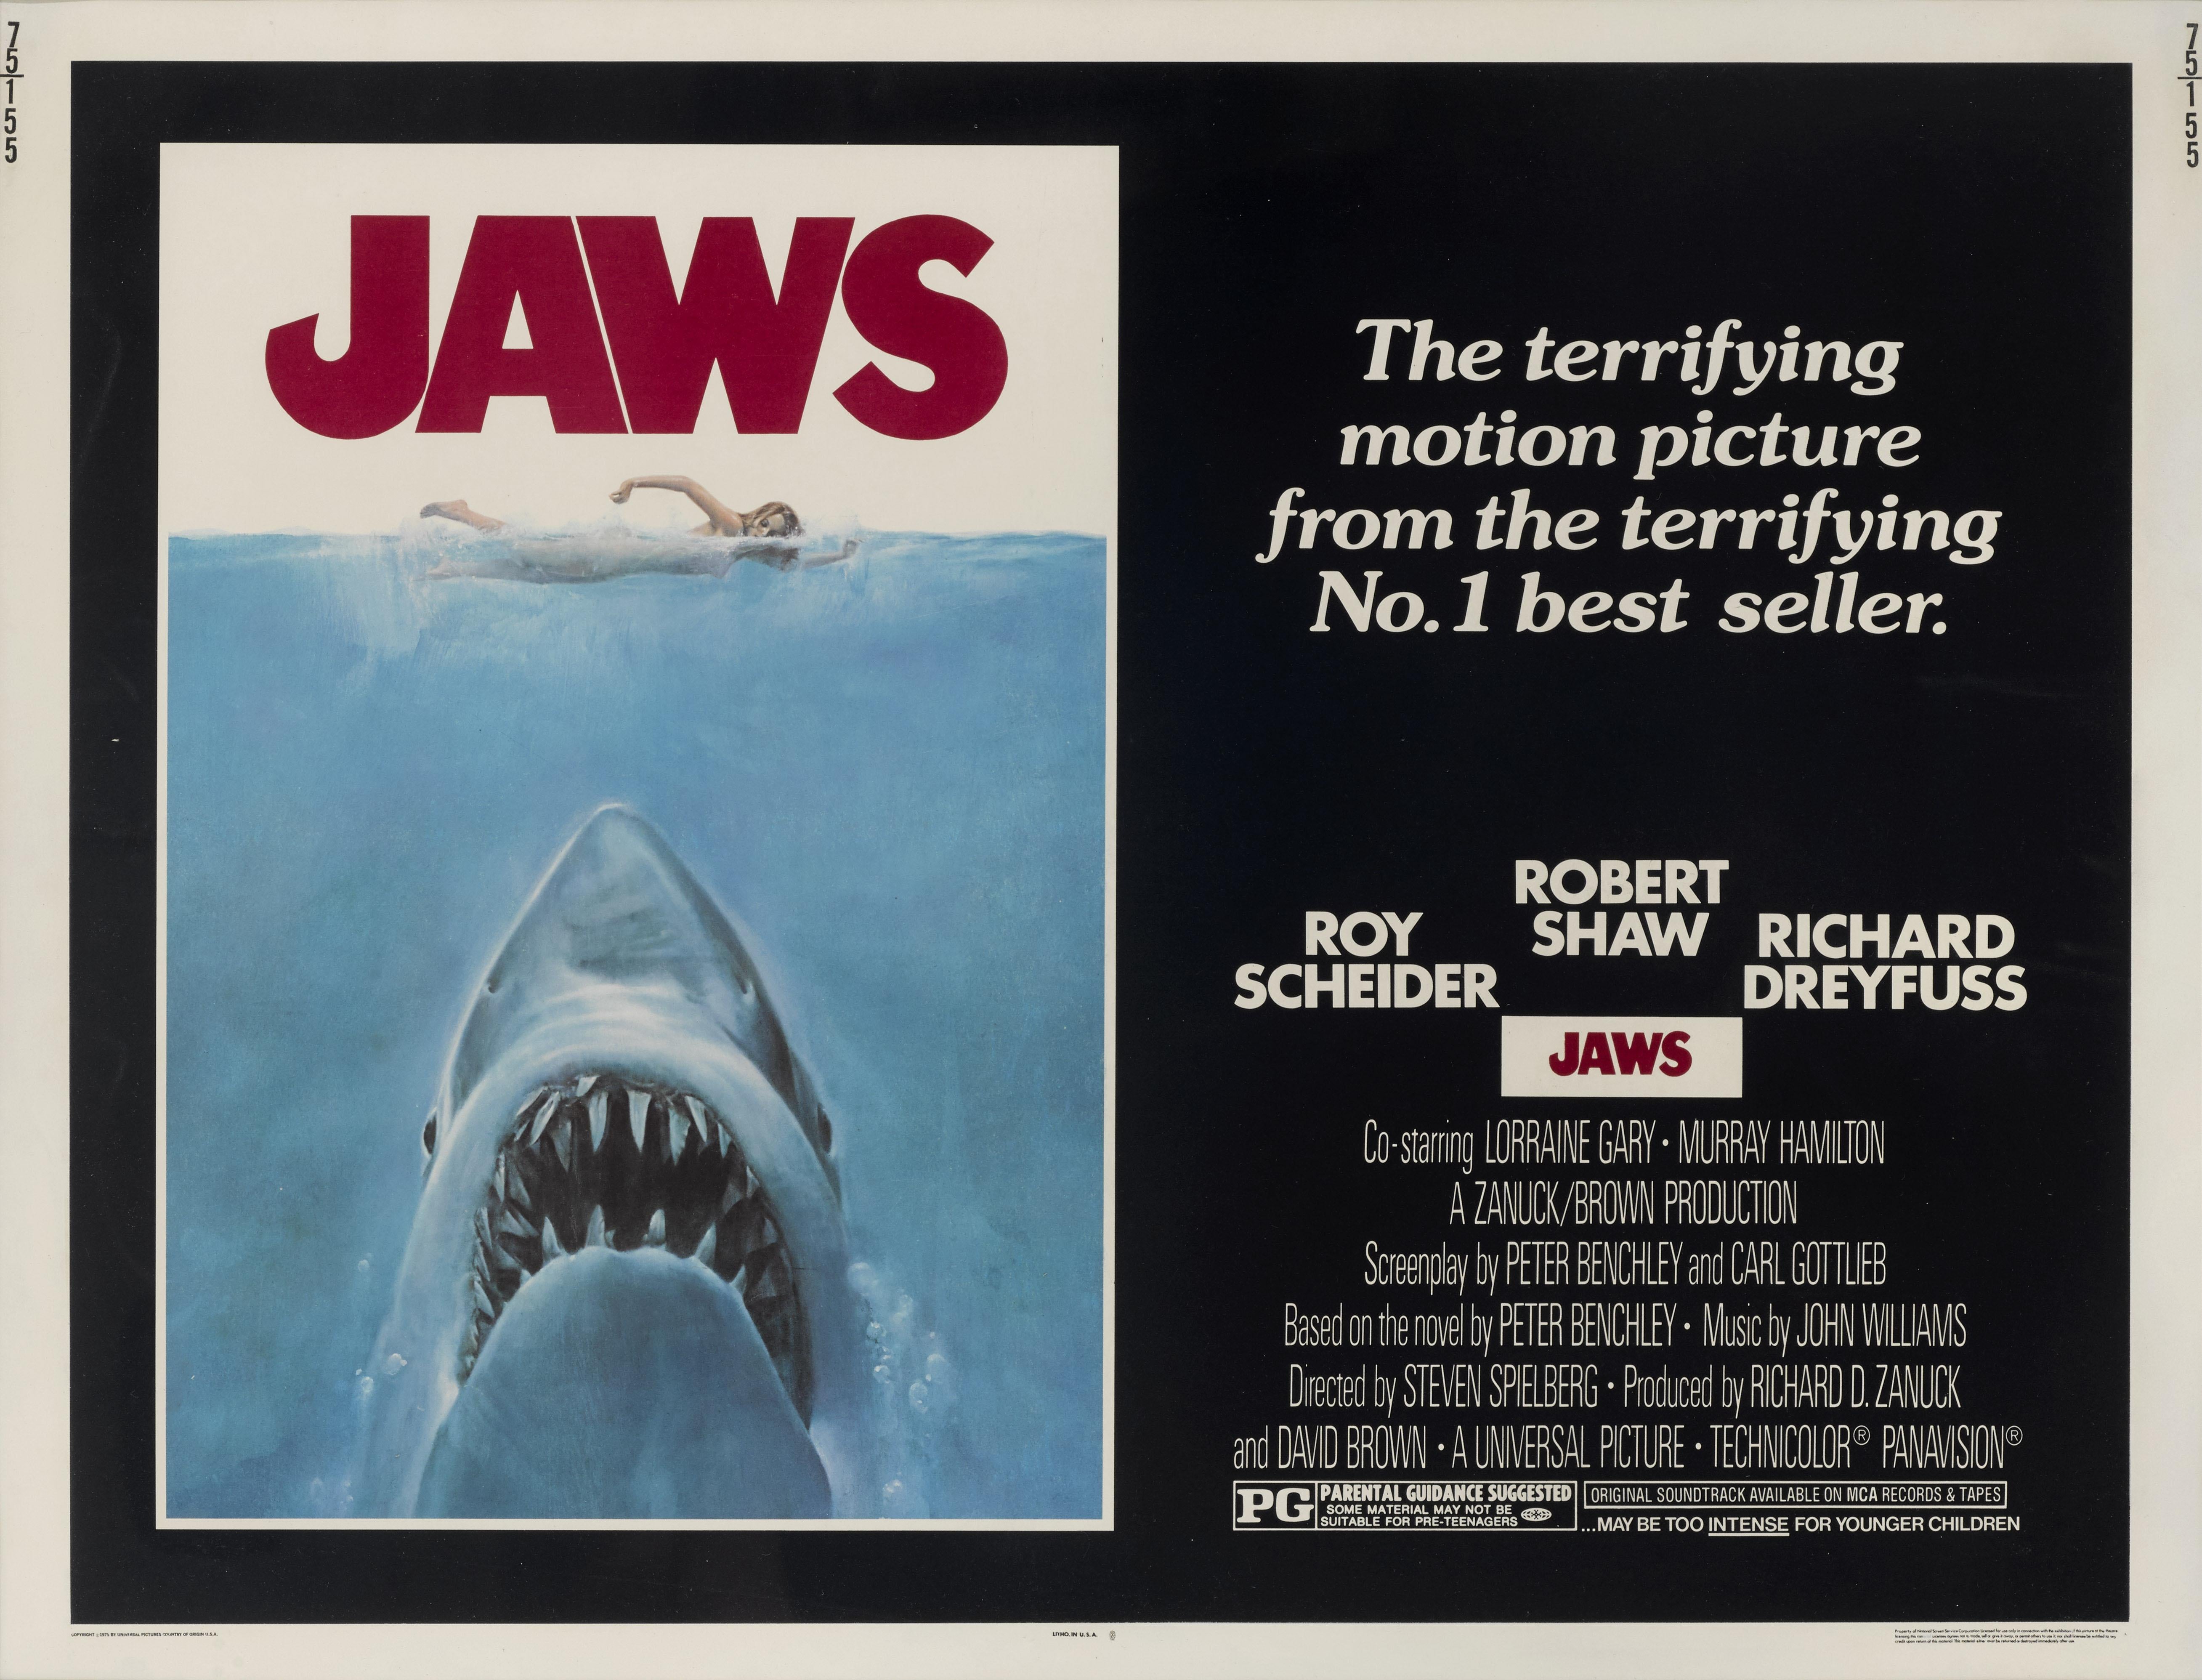 American Jaws